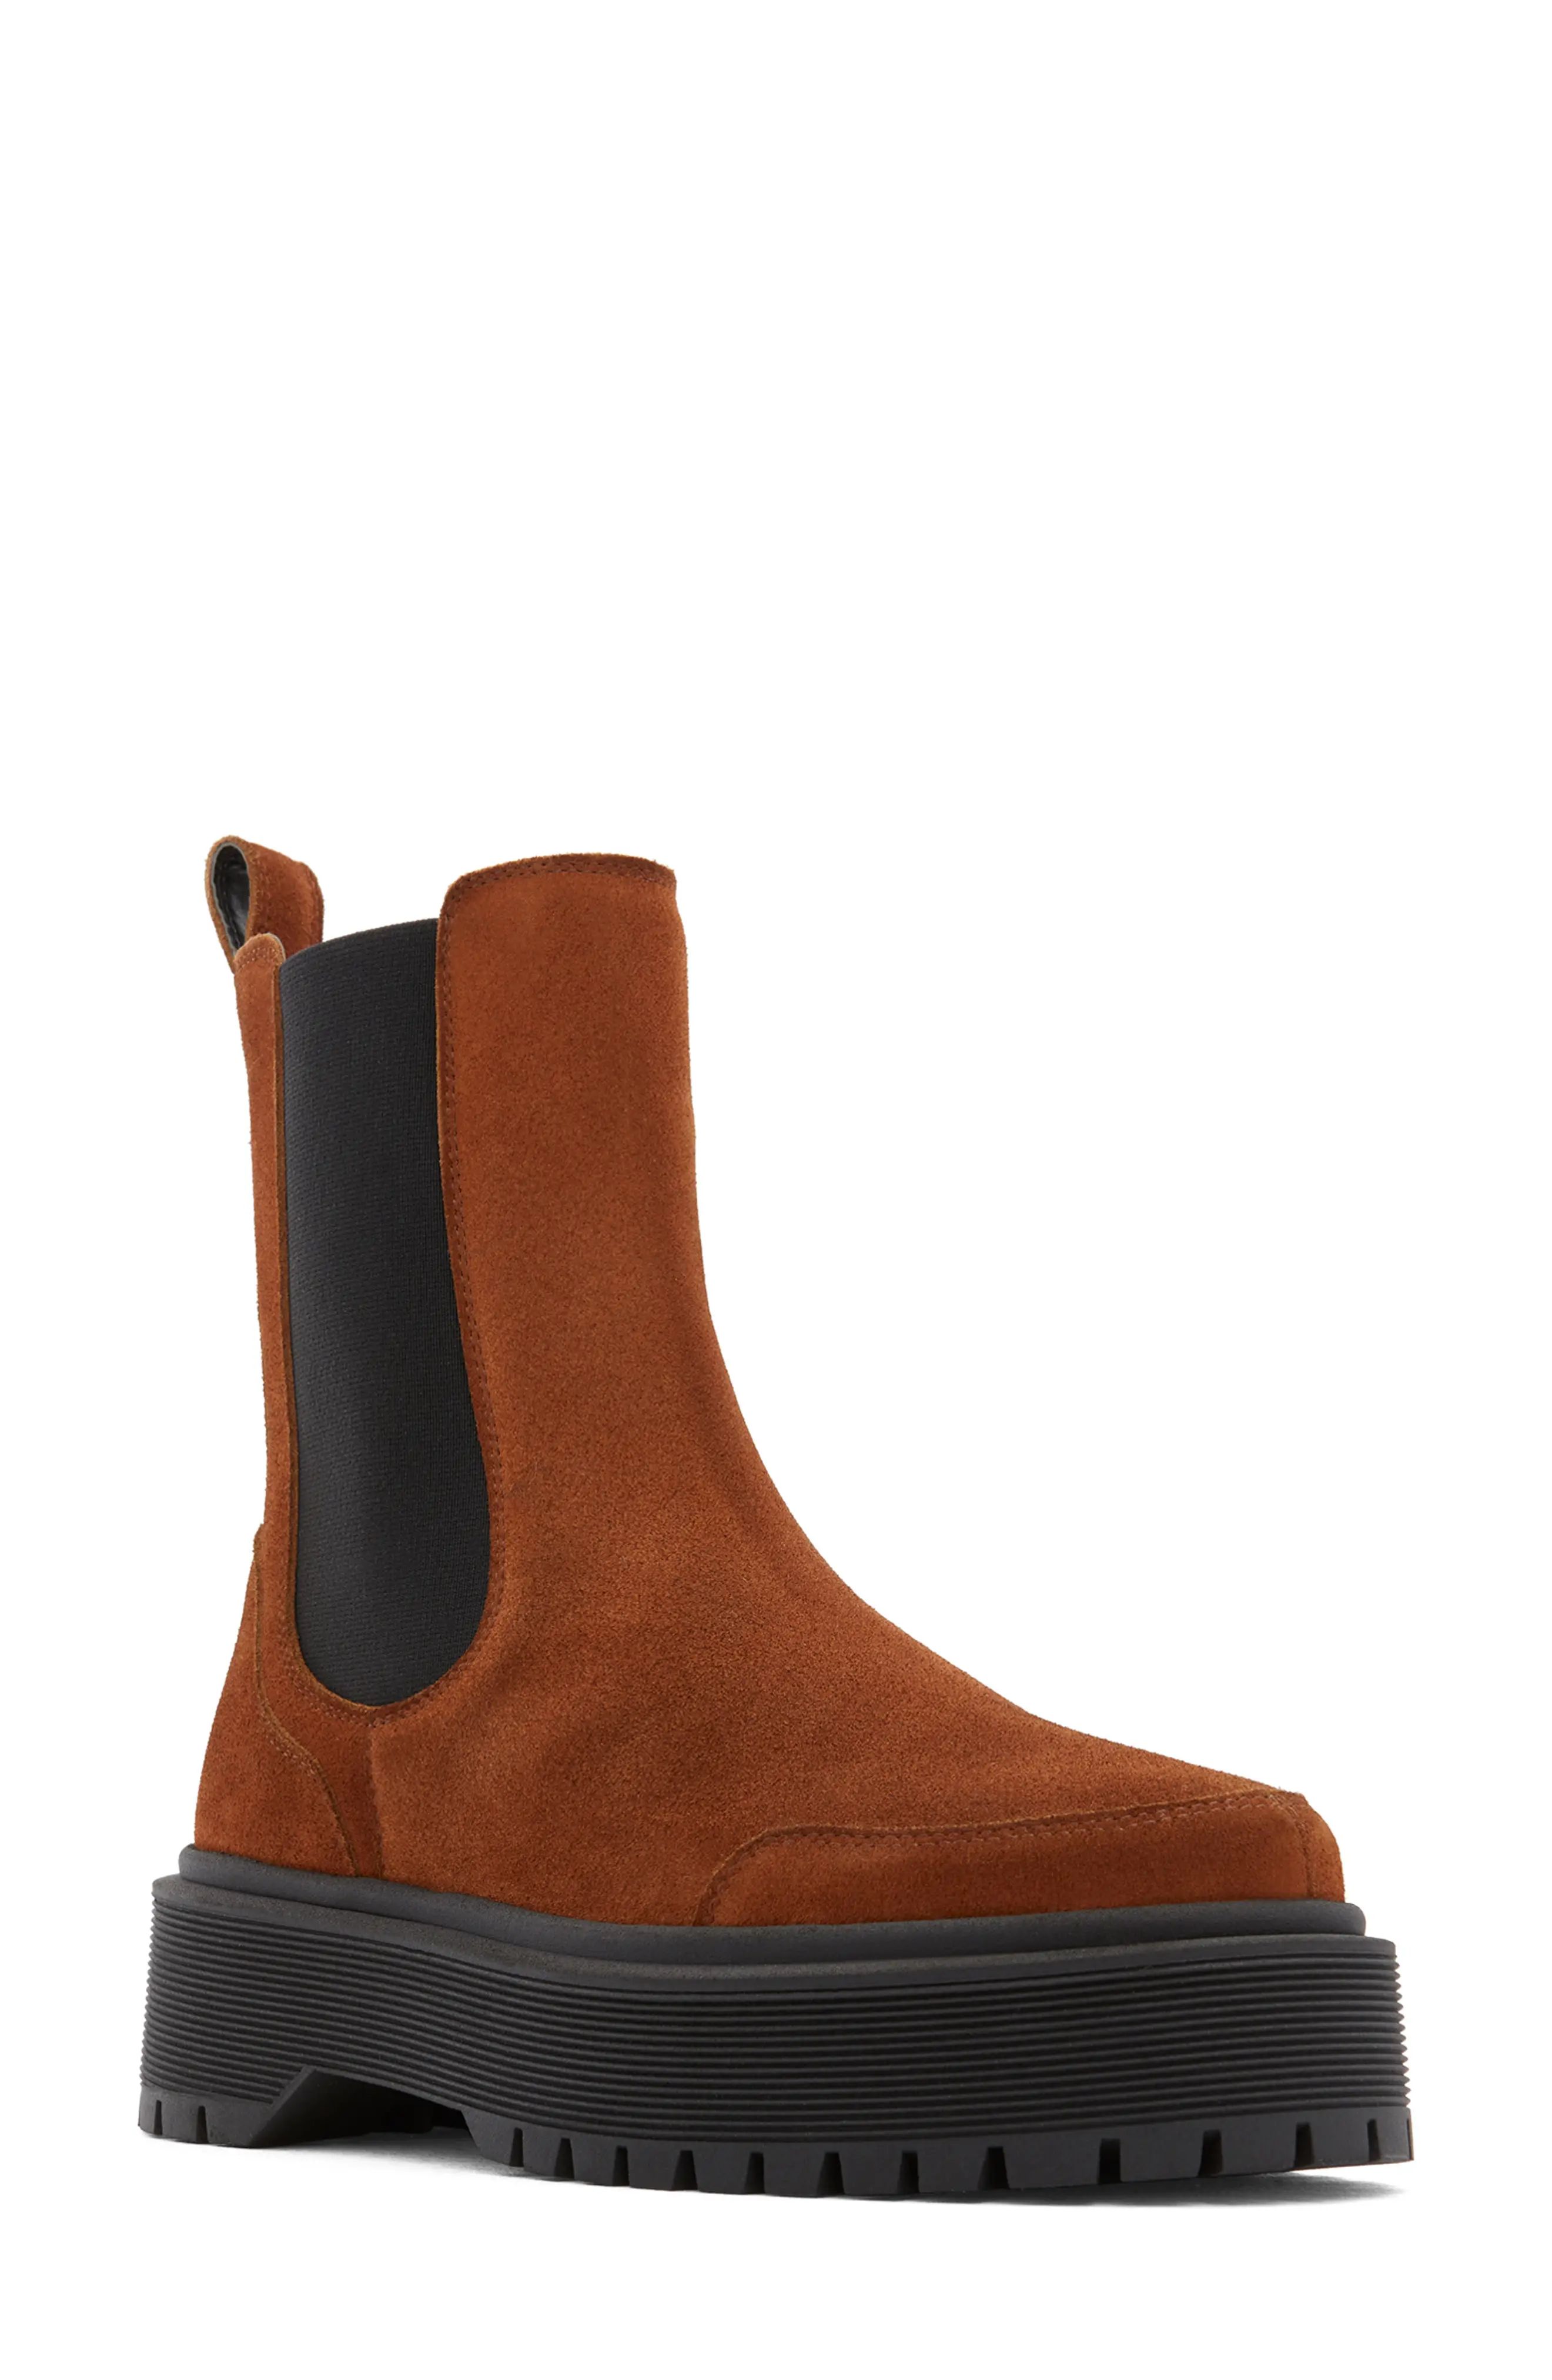 Who What Wear Sowyer Platform Chelsea Boot, Size 7 in Cognac at Nordstrom | Nordstrom